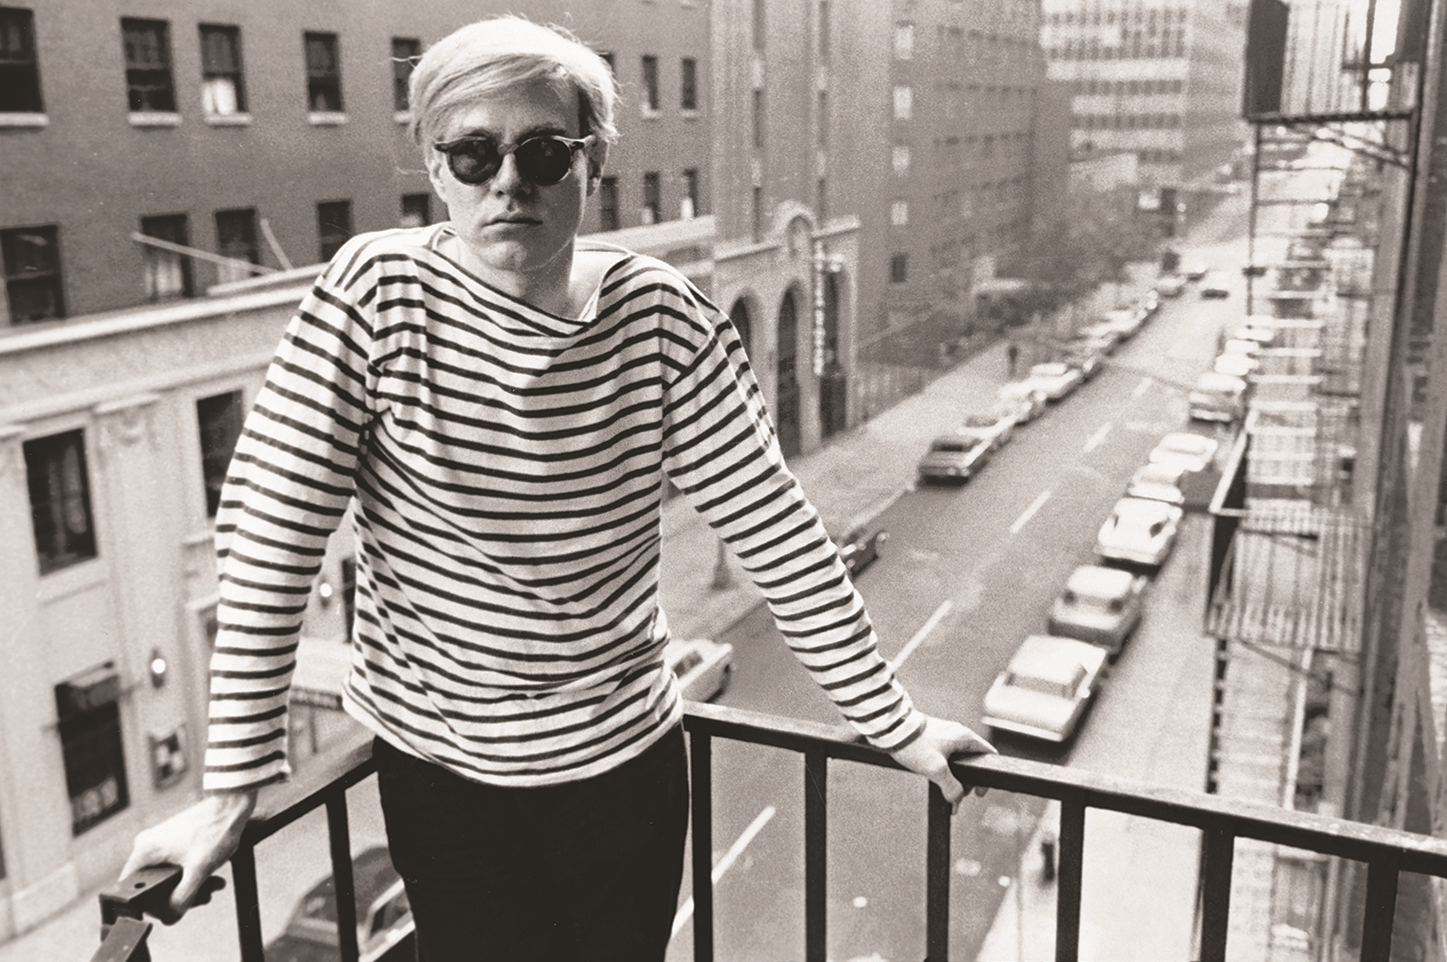 Stephen Shore: Andy Warhol on fire escape of the Factory, 231 East 47th Street, 1965-7. All images from Factory: Andy Warhol by Stephen Shore